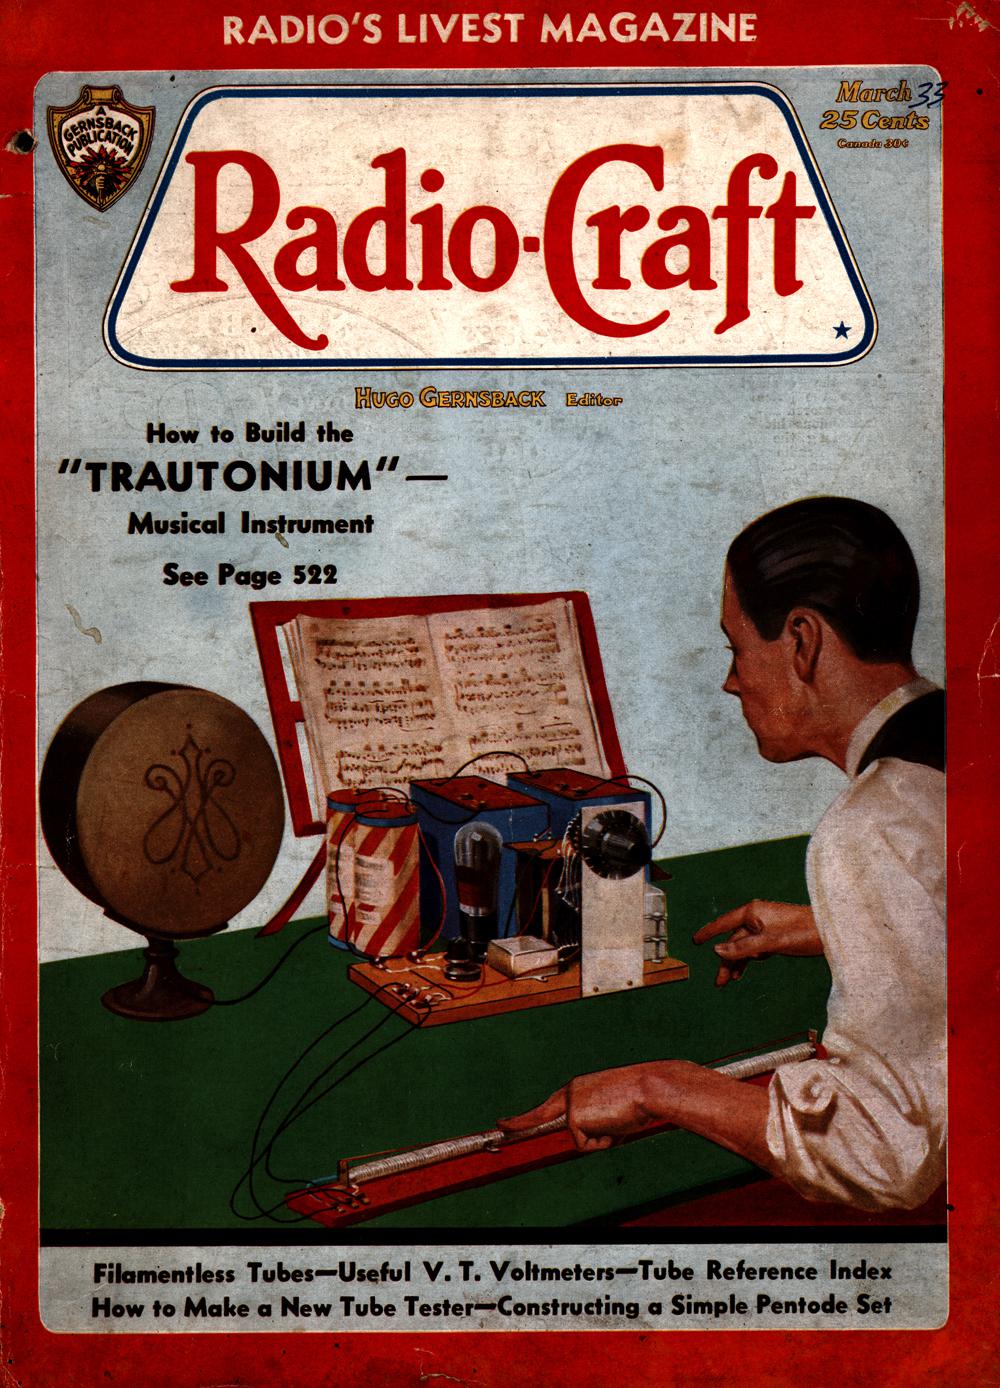 1933 - Radio-craft. and popular electronics; radio-electronics in all its phases - Vol. 4, No. 9